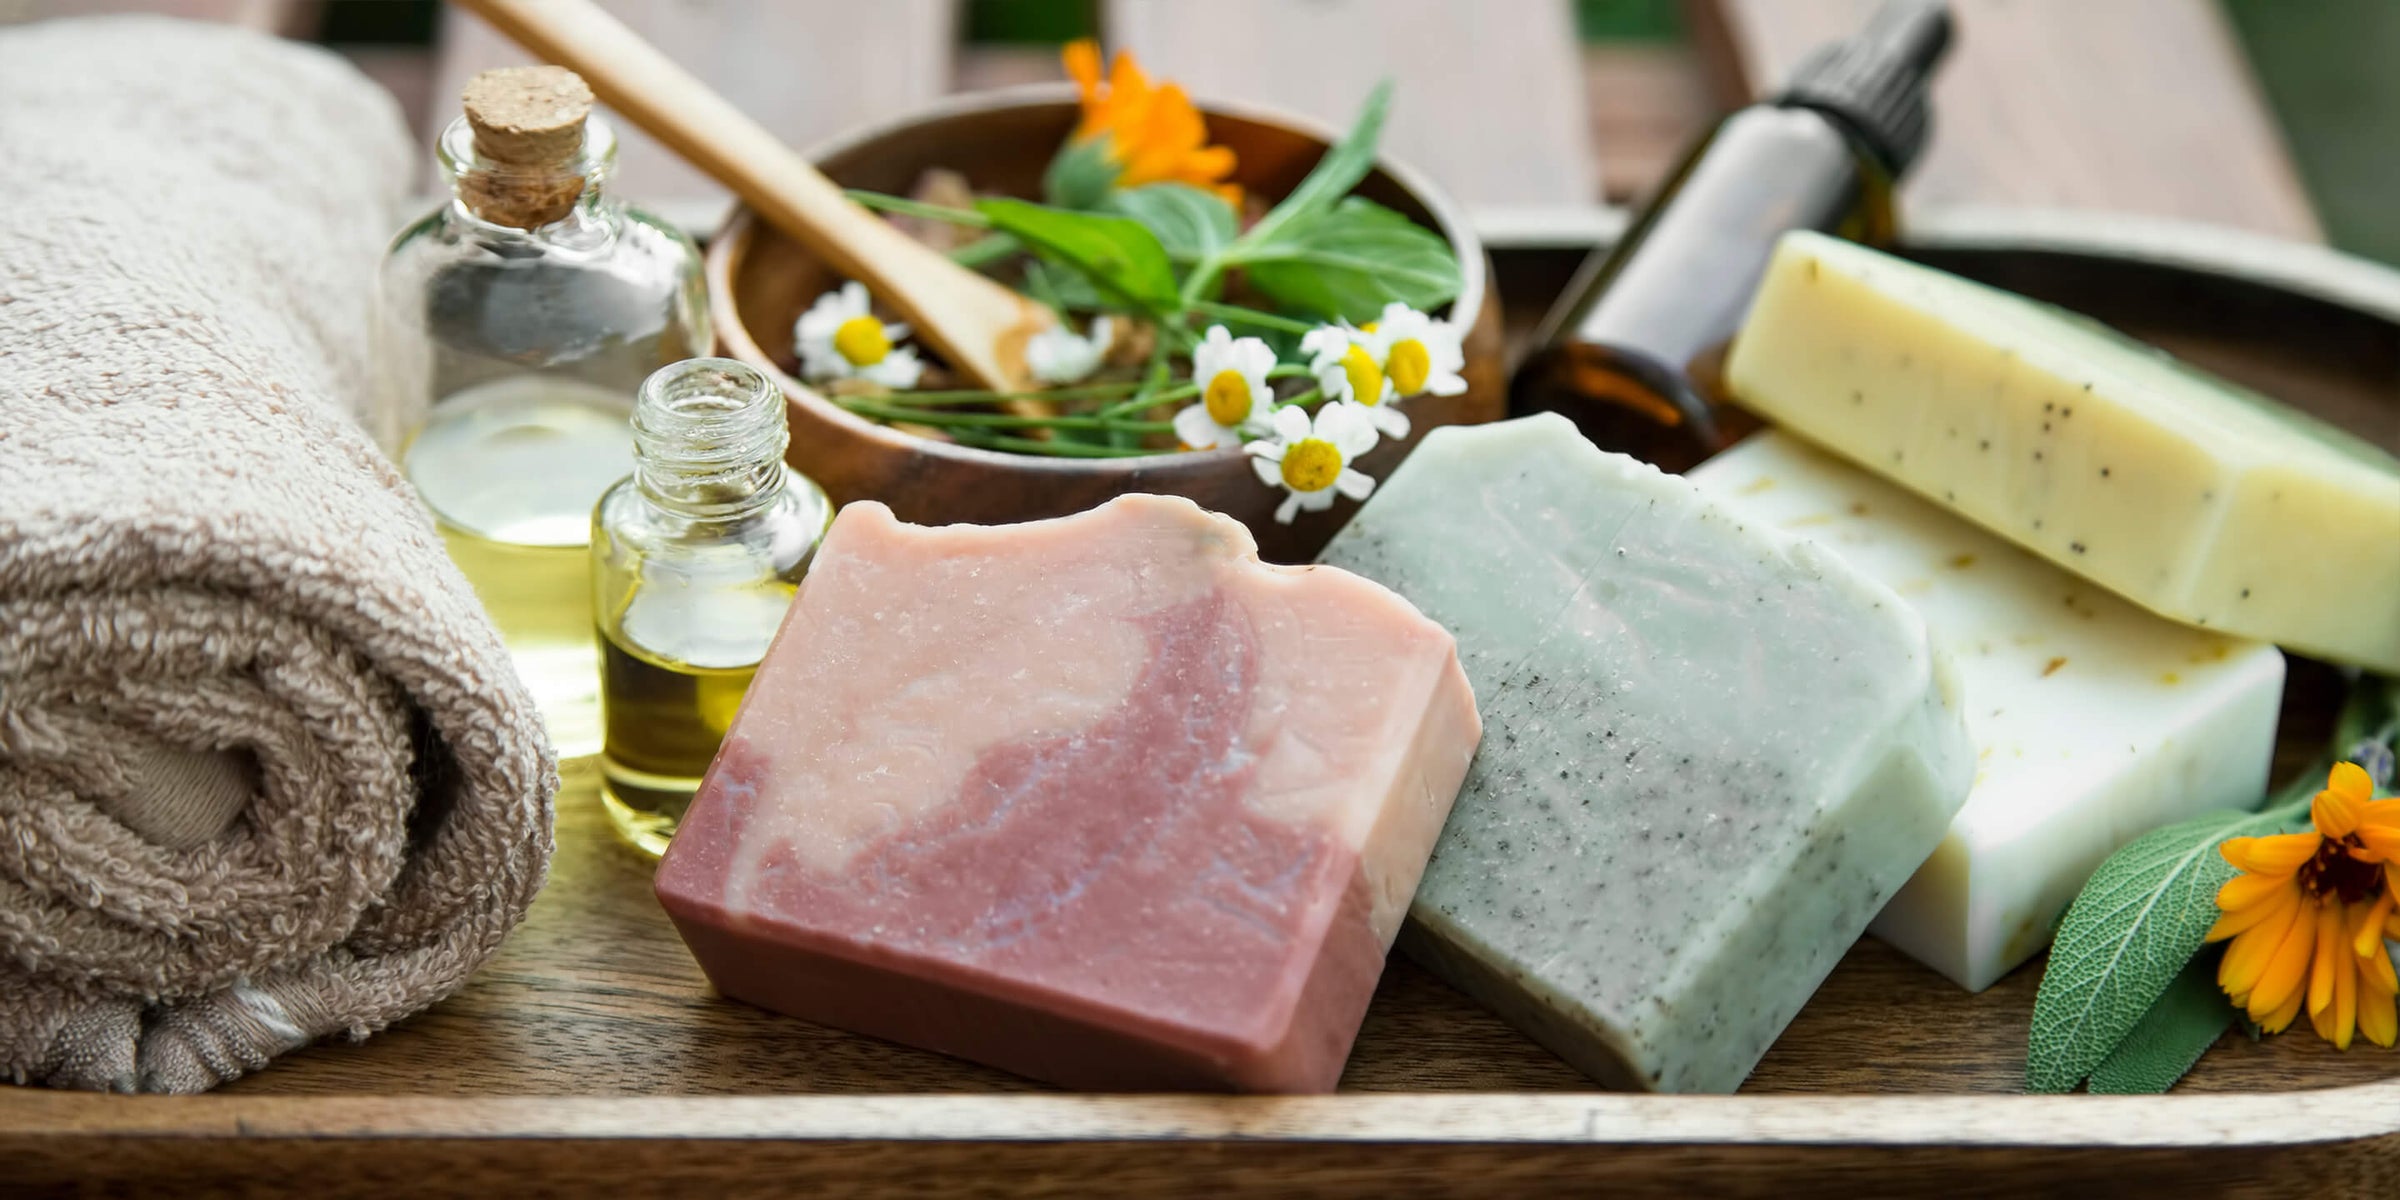 Towel, Soap bars, oils and herbs